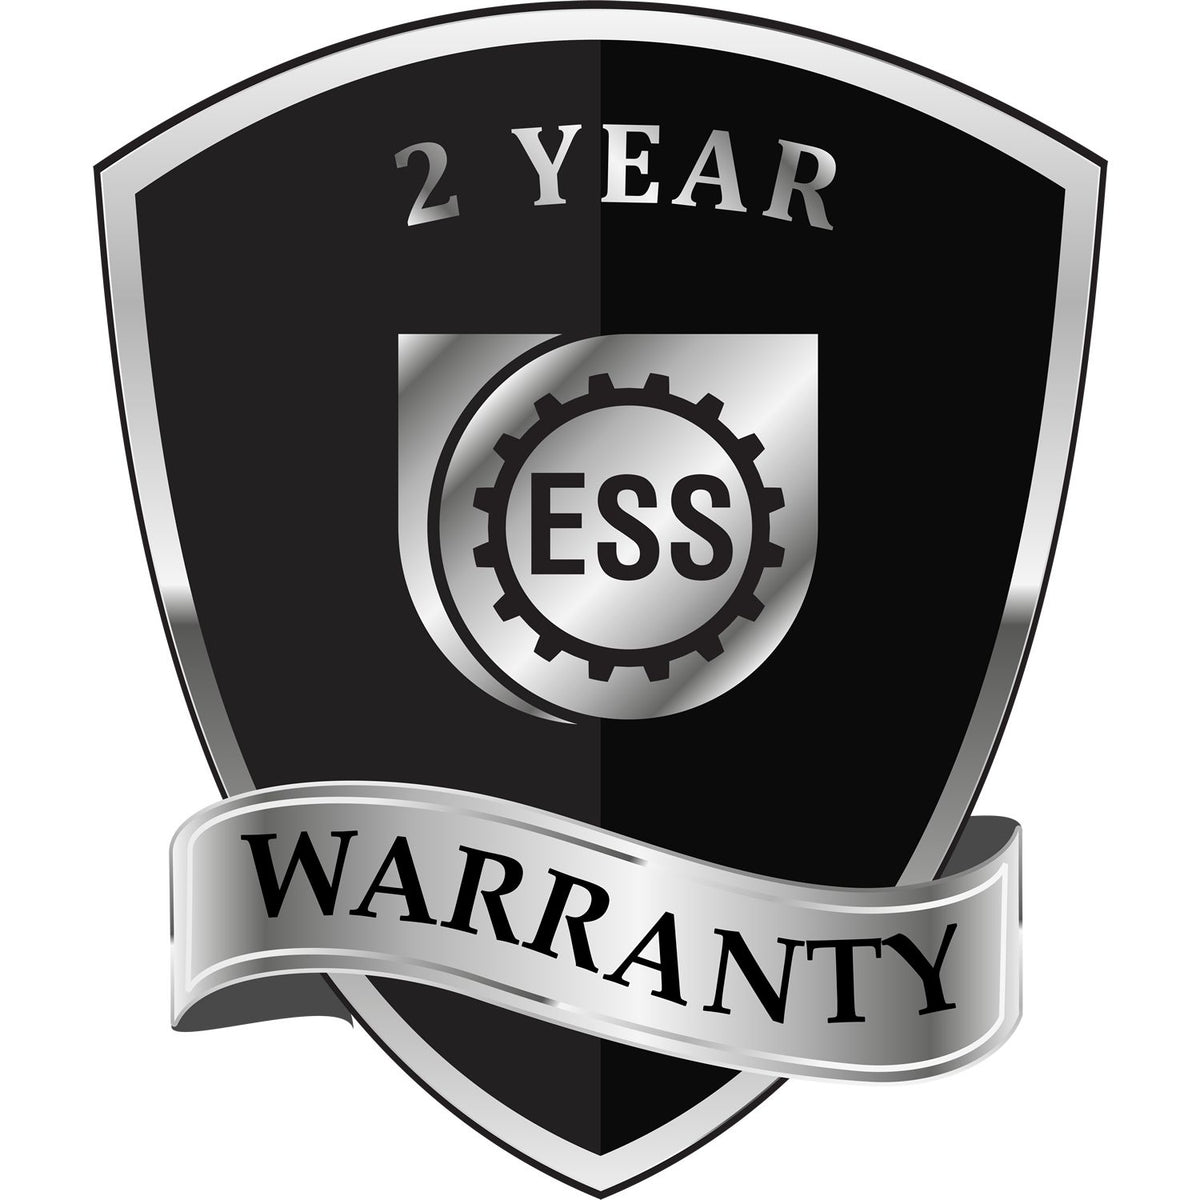 A black and silver badge or emblem showing warranty information for the Soft Louisiana Professional Geologist Seal